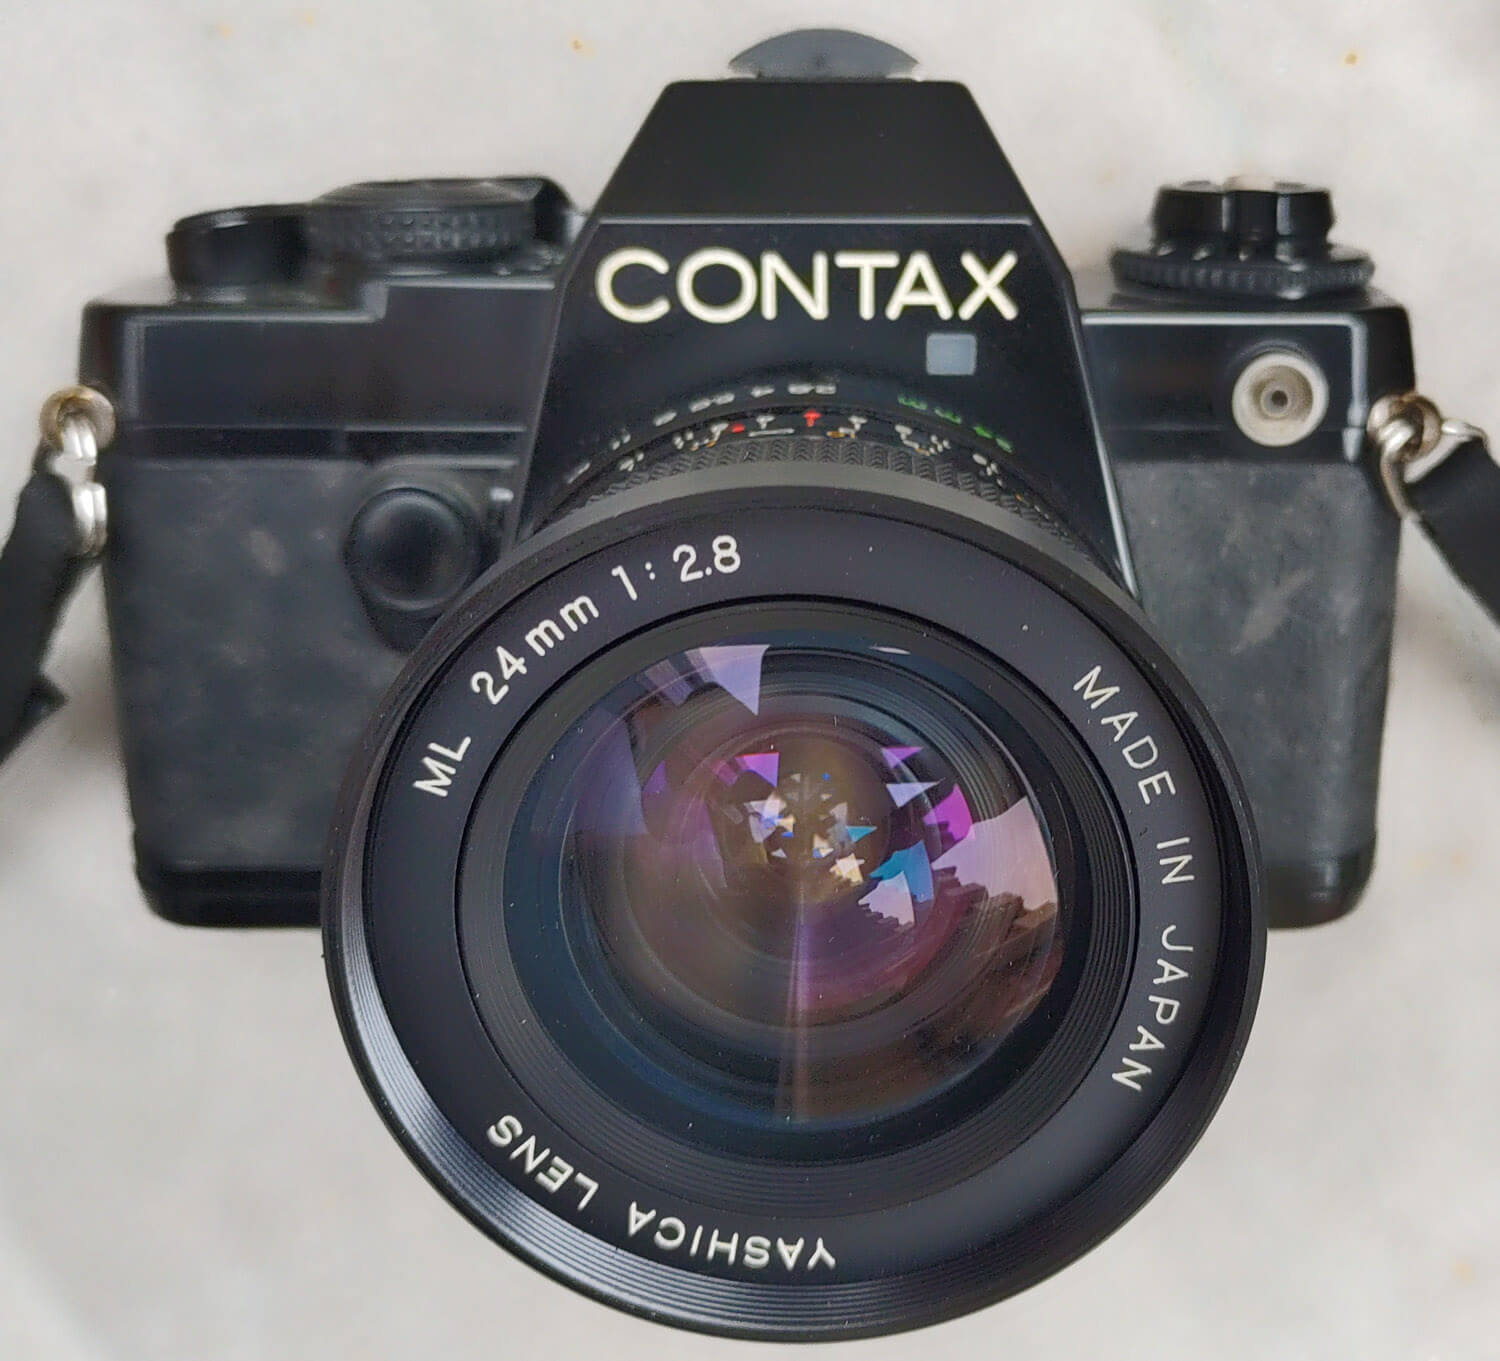 My Contax 139 and Yashica 24mm f/2.8 lens, Sergio Palazzi